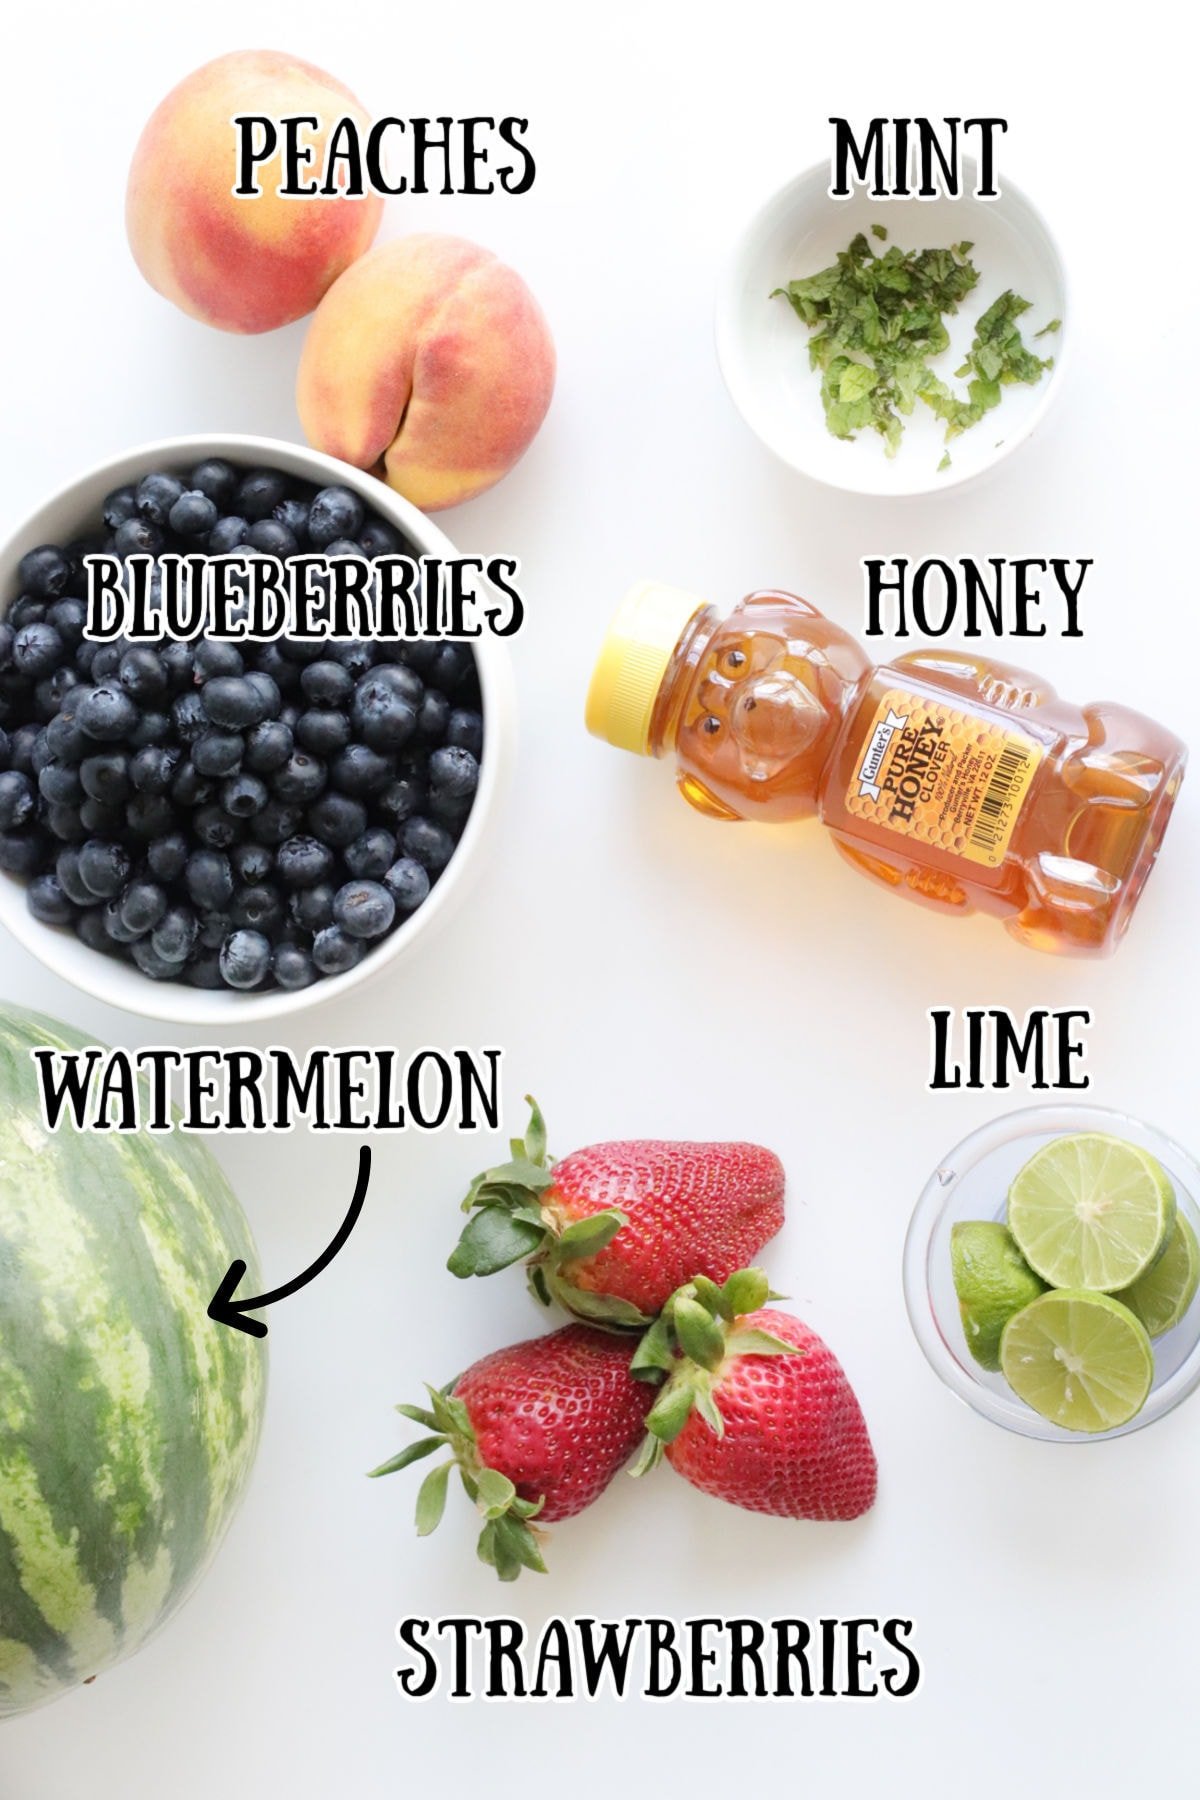 Labeled ingredients for this fruit salad recipe.